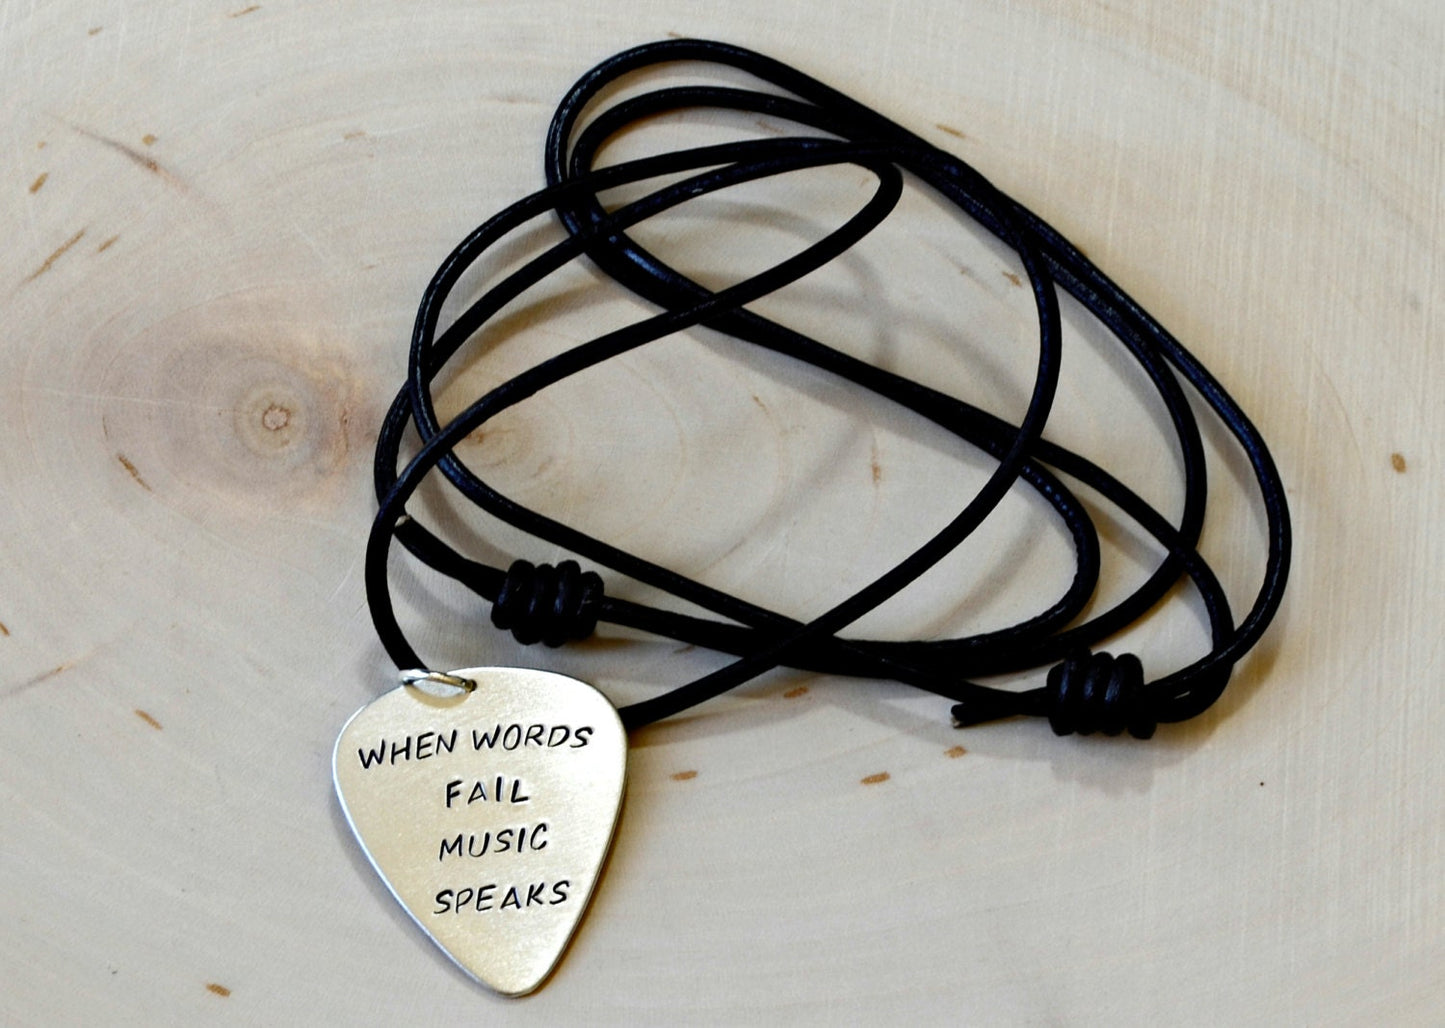 When words fail music speaks sterling silver guitar pick necklace